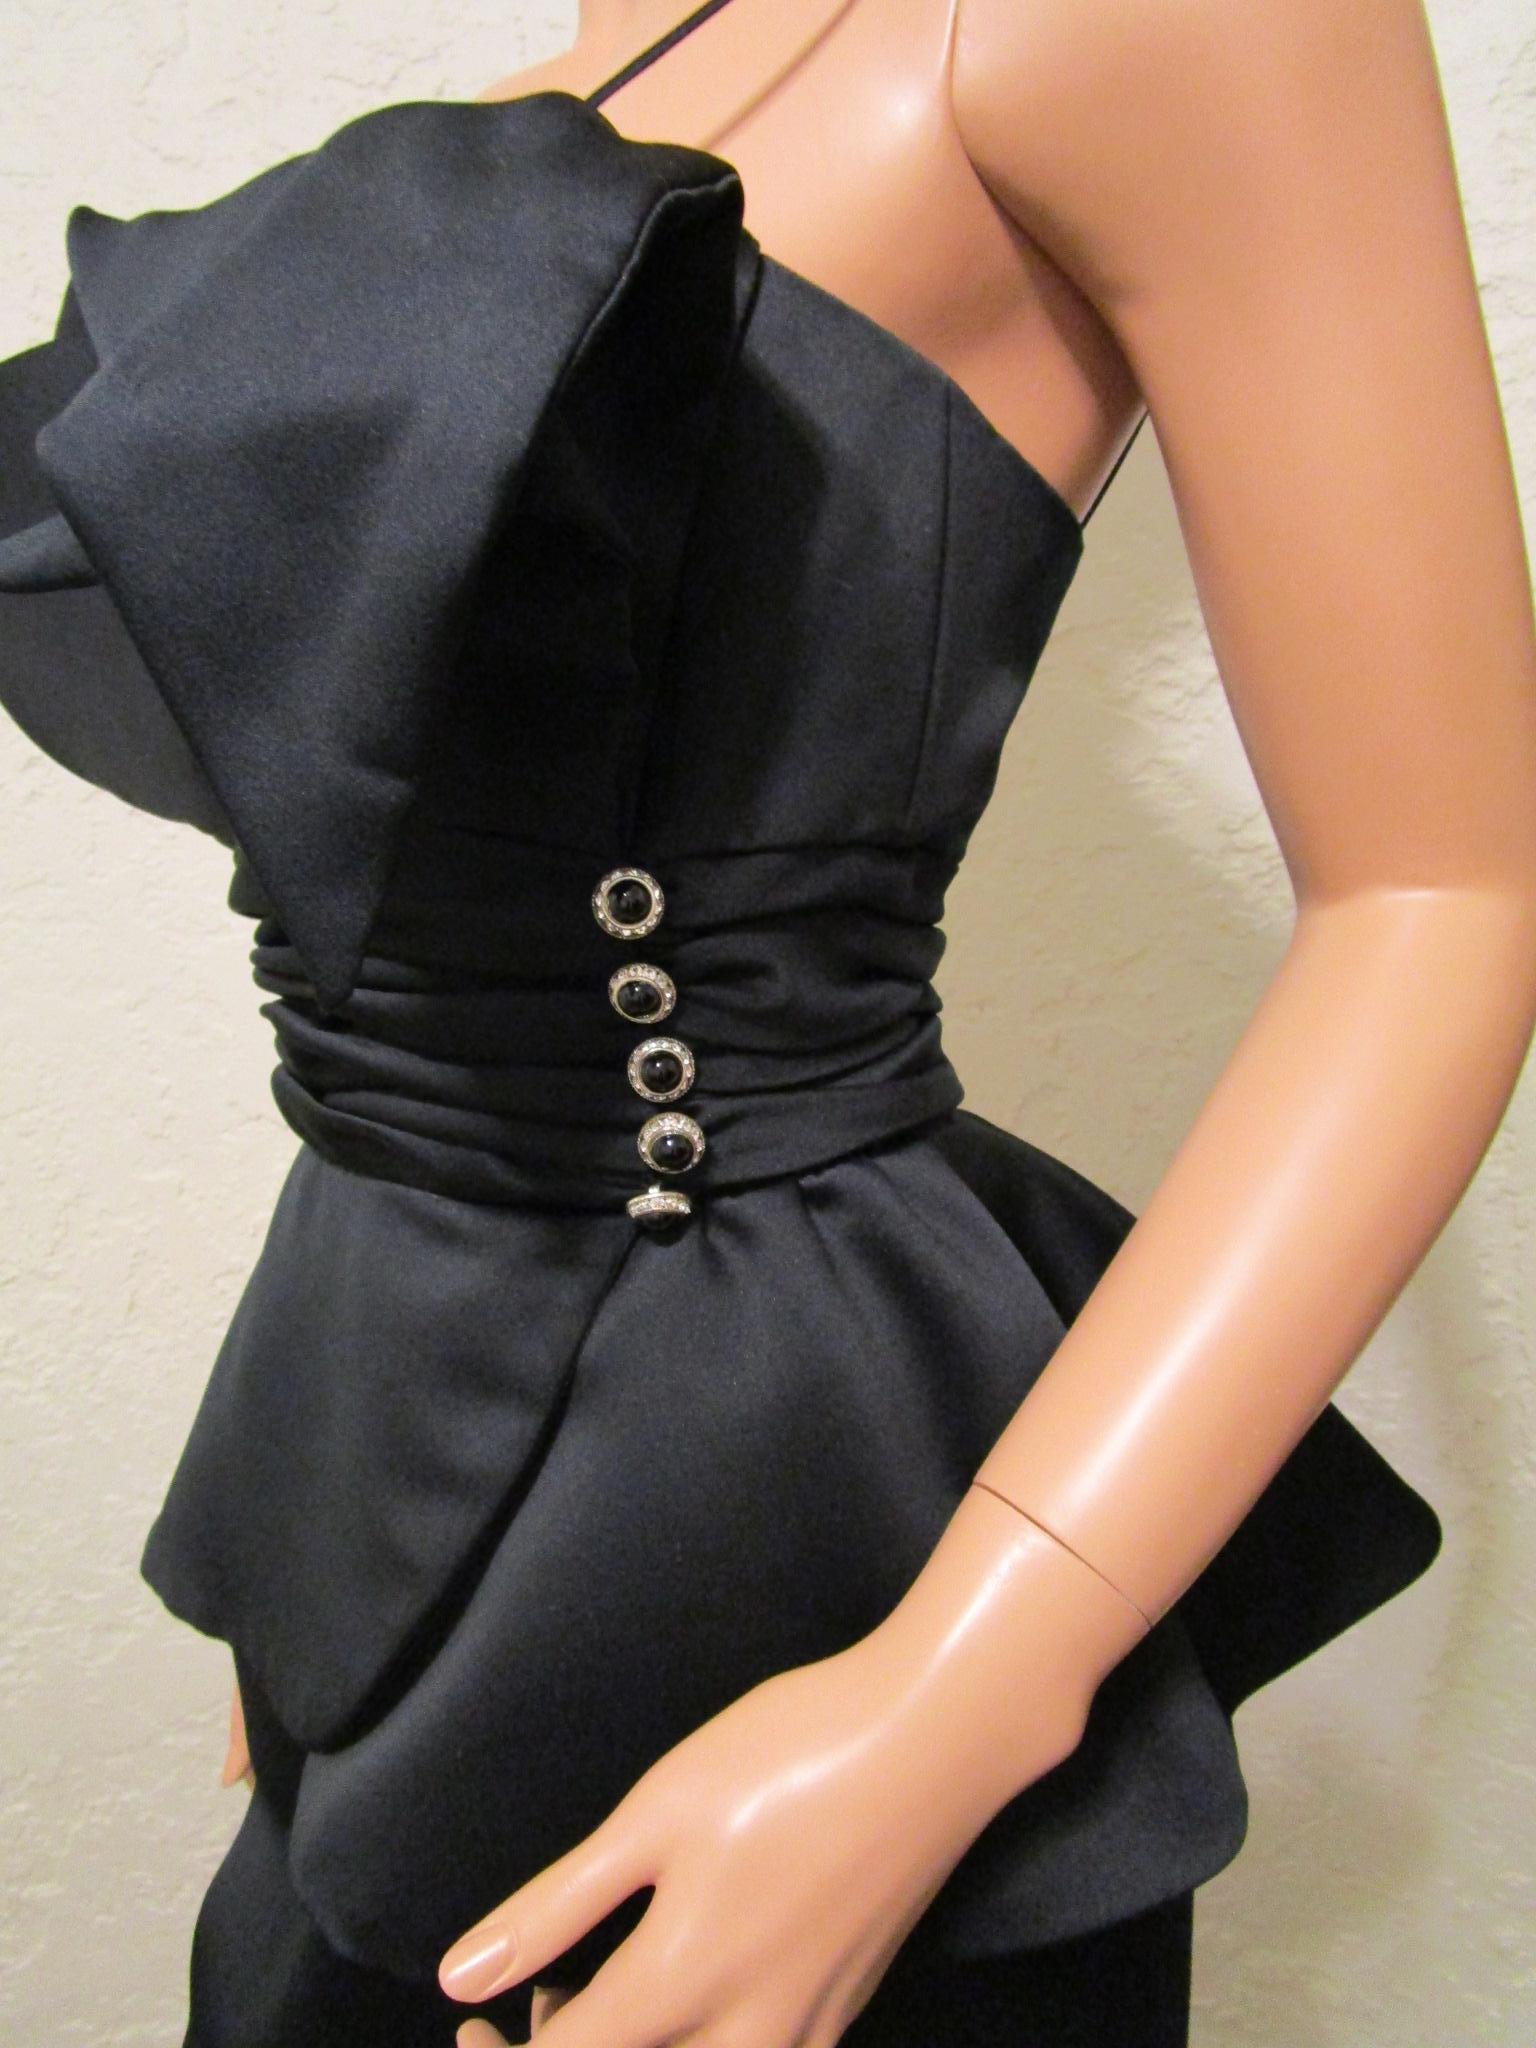 Gorgeous VICTOR COSTA cocktail evening dress in black satin with one spaghetti shoulder strap.   Bust design has interior wires for adjusting the perfect look.

Slim split skirt with ruching and flare waist detail accented by 5 decorative rhinestone